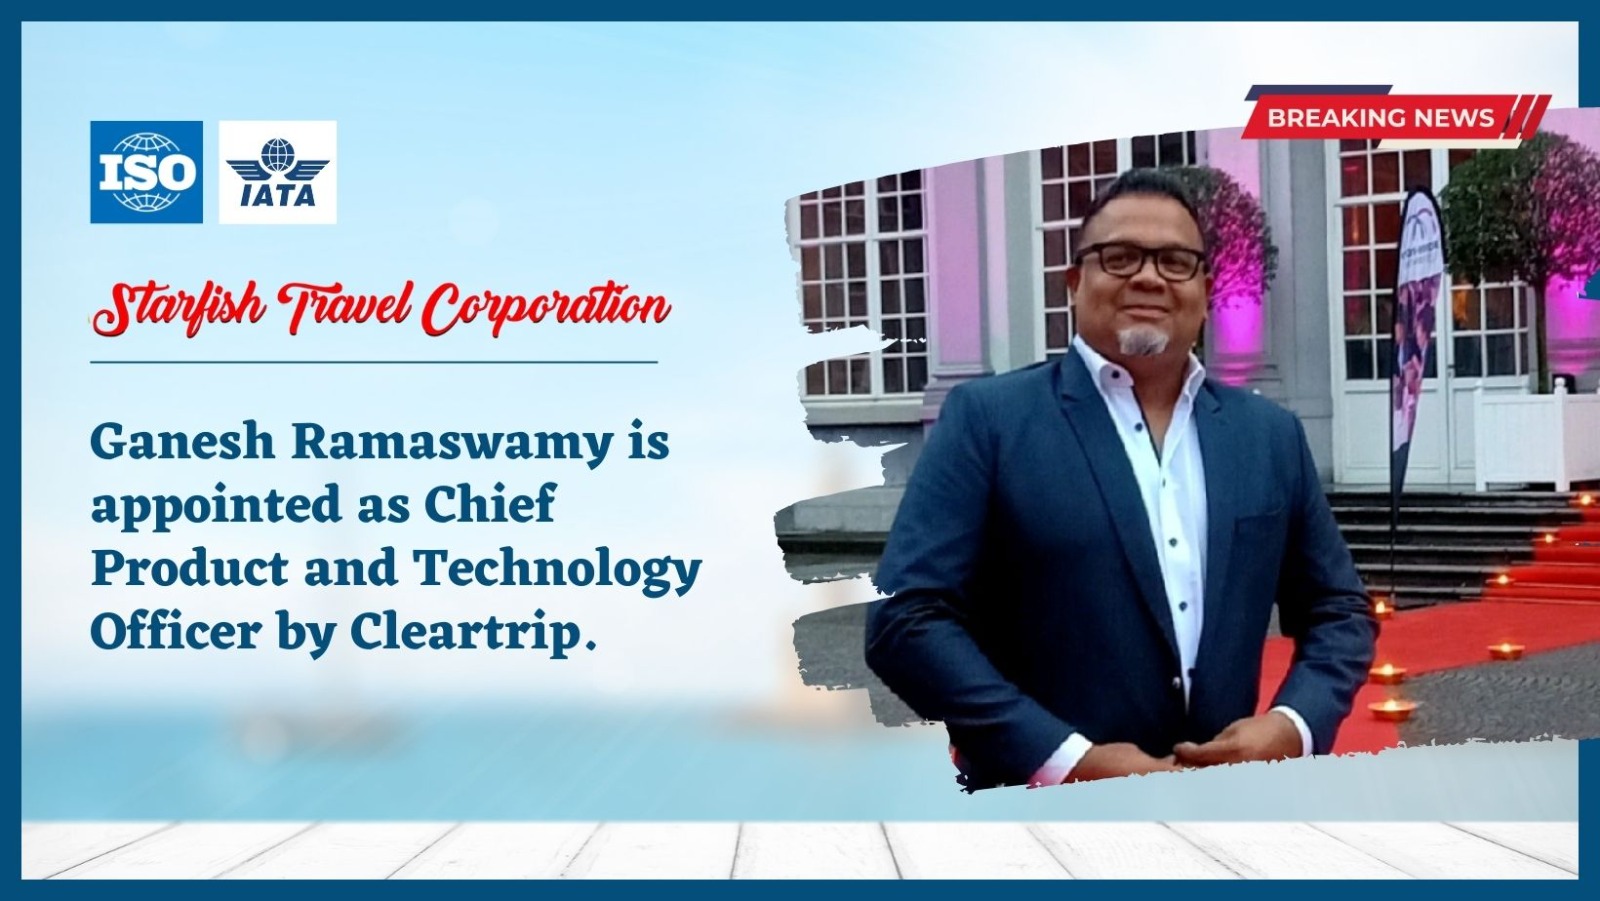 You are currently viewing Ganesh Ramaswamy is appointed as Chief Product and Technology Officer by Cleartrip.